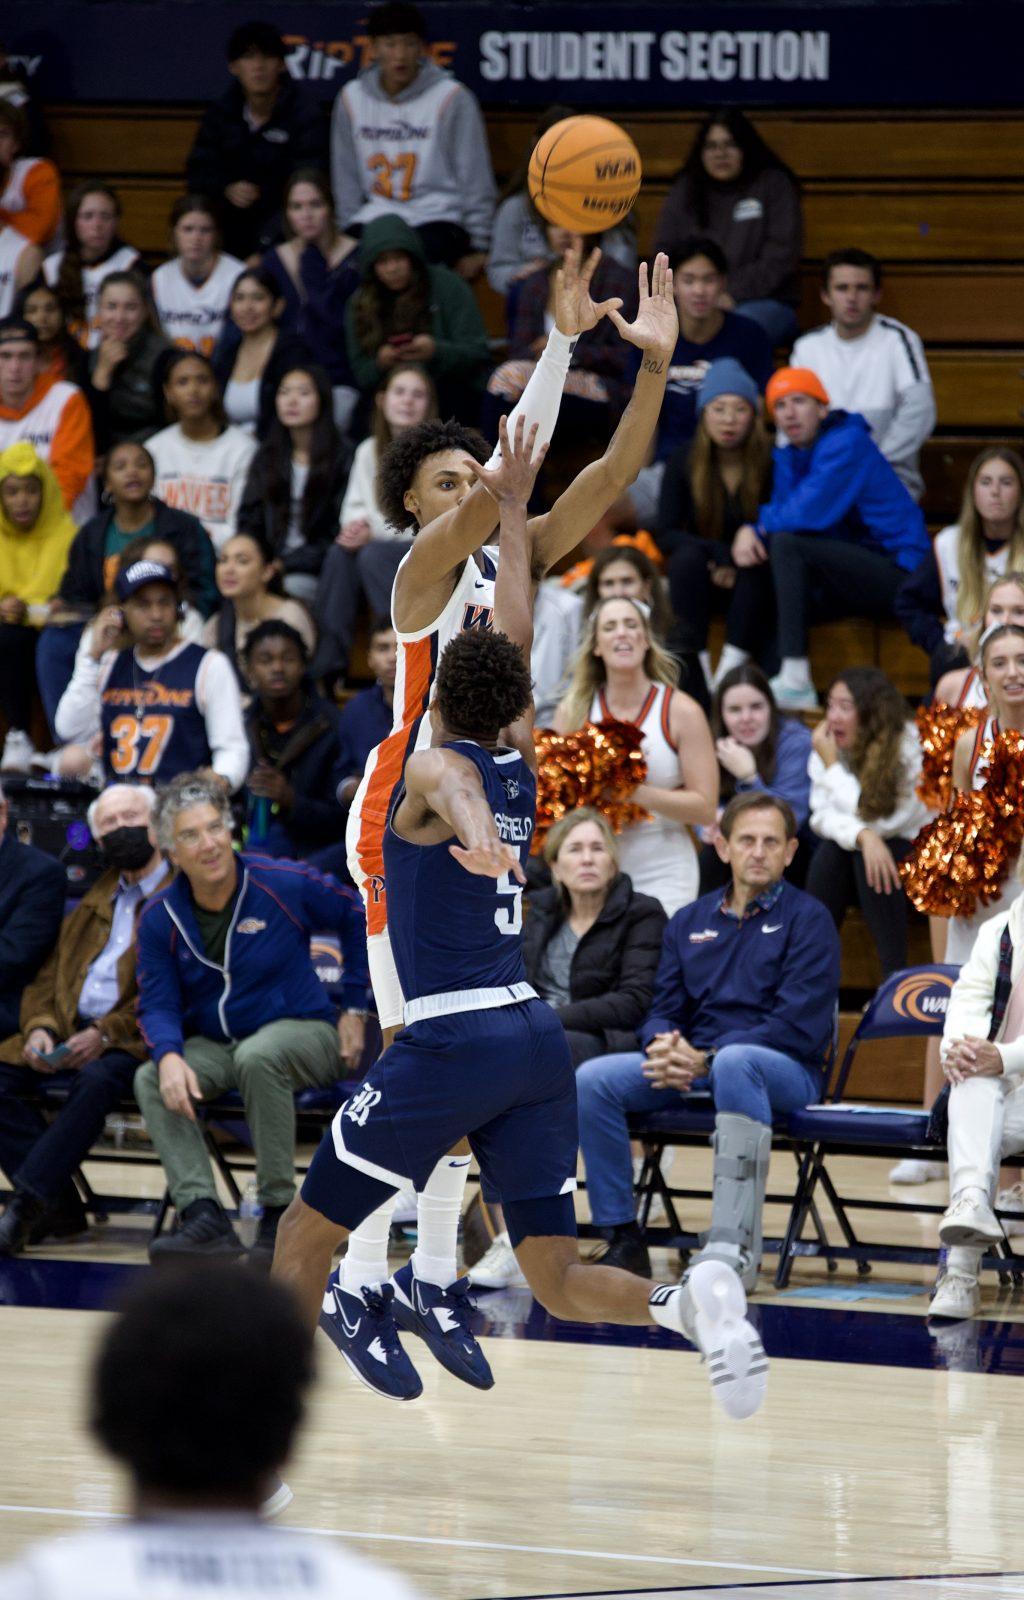 Pepperdine Men's Basketball sophomore forward Maxwell Lewis rises up for a jumper versus Rice University on Nov. 7 at Firestone Fieldhouse. Lewis eclipsed his then-career high of 29 points, when he scored 30 points versus Pacific on Jan. 7.